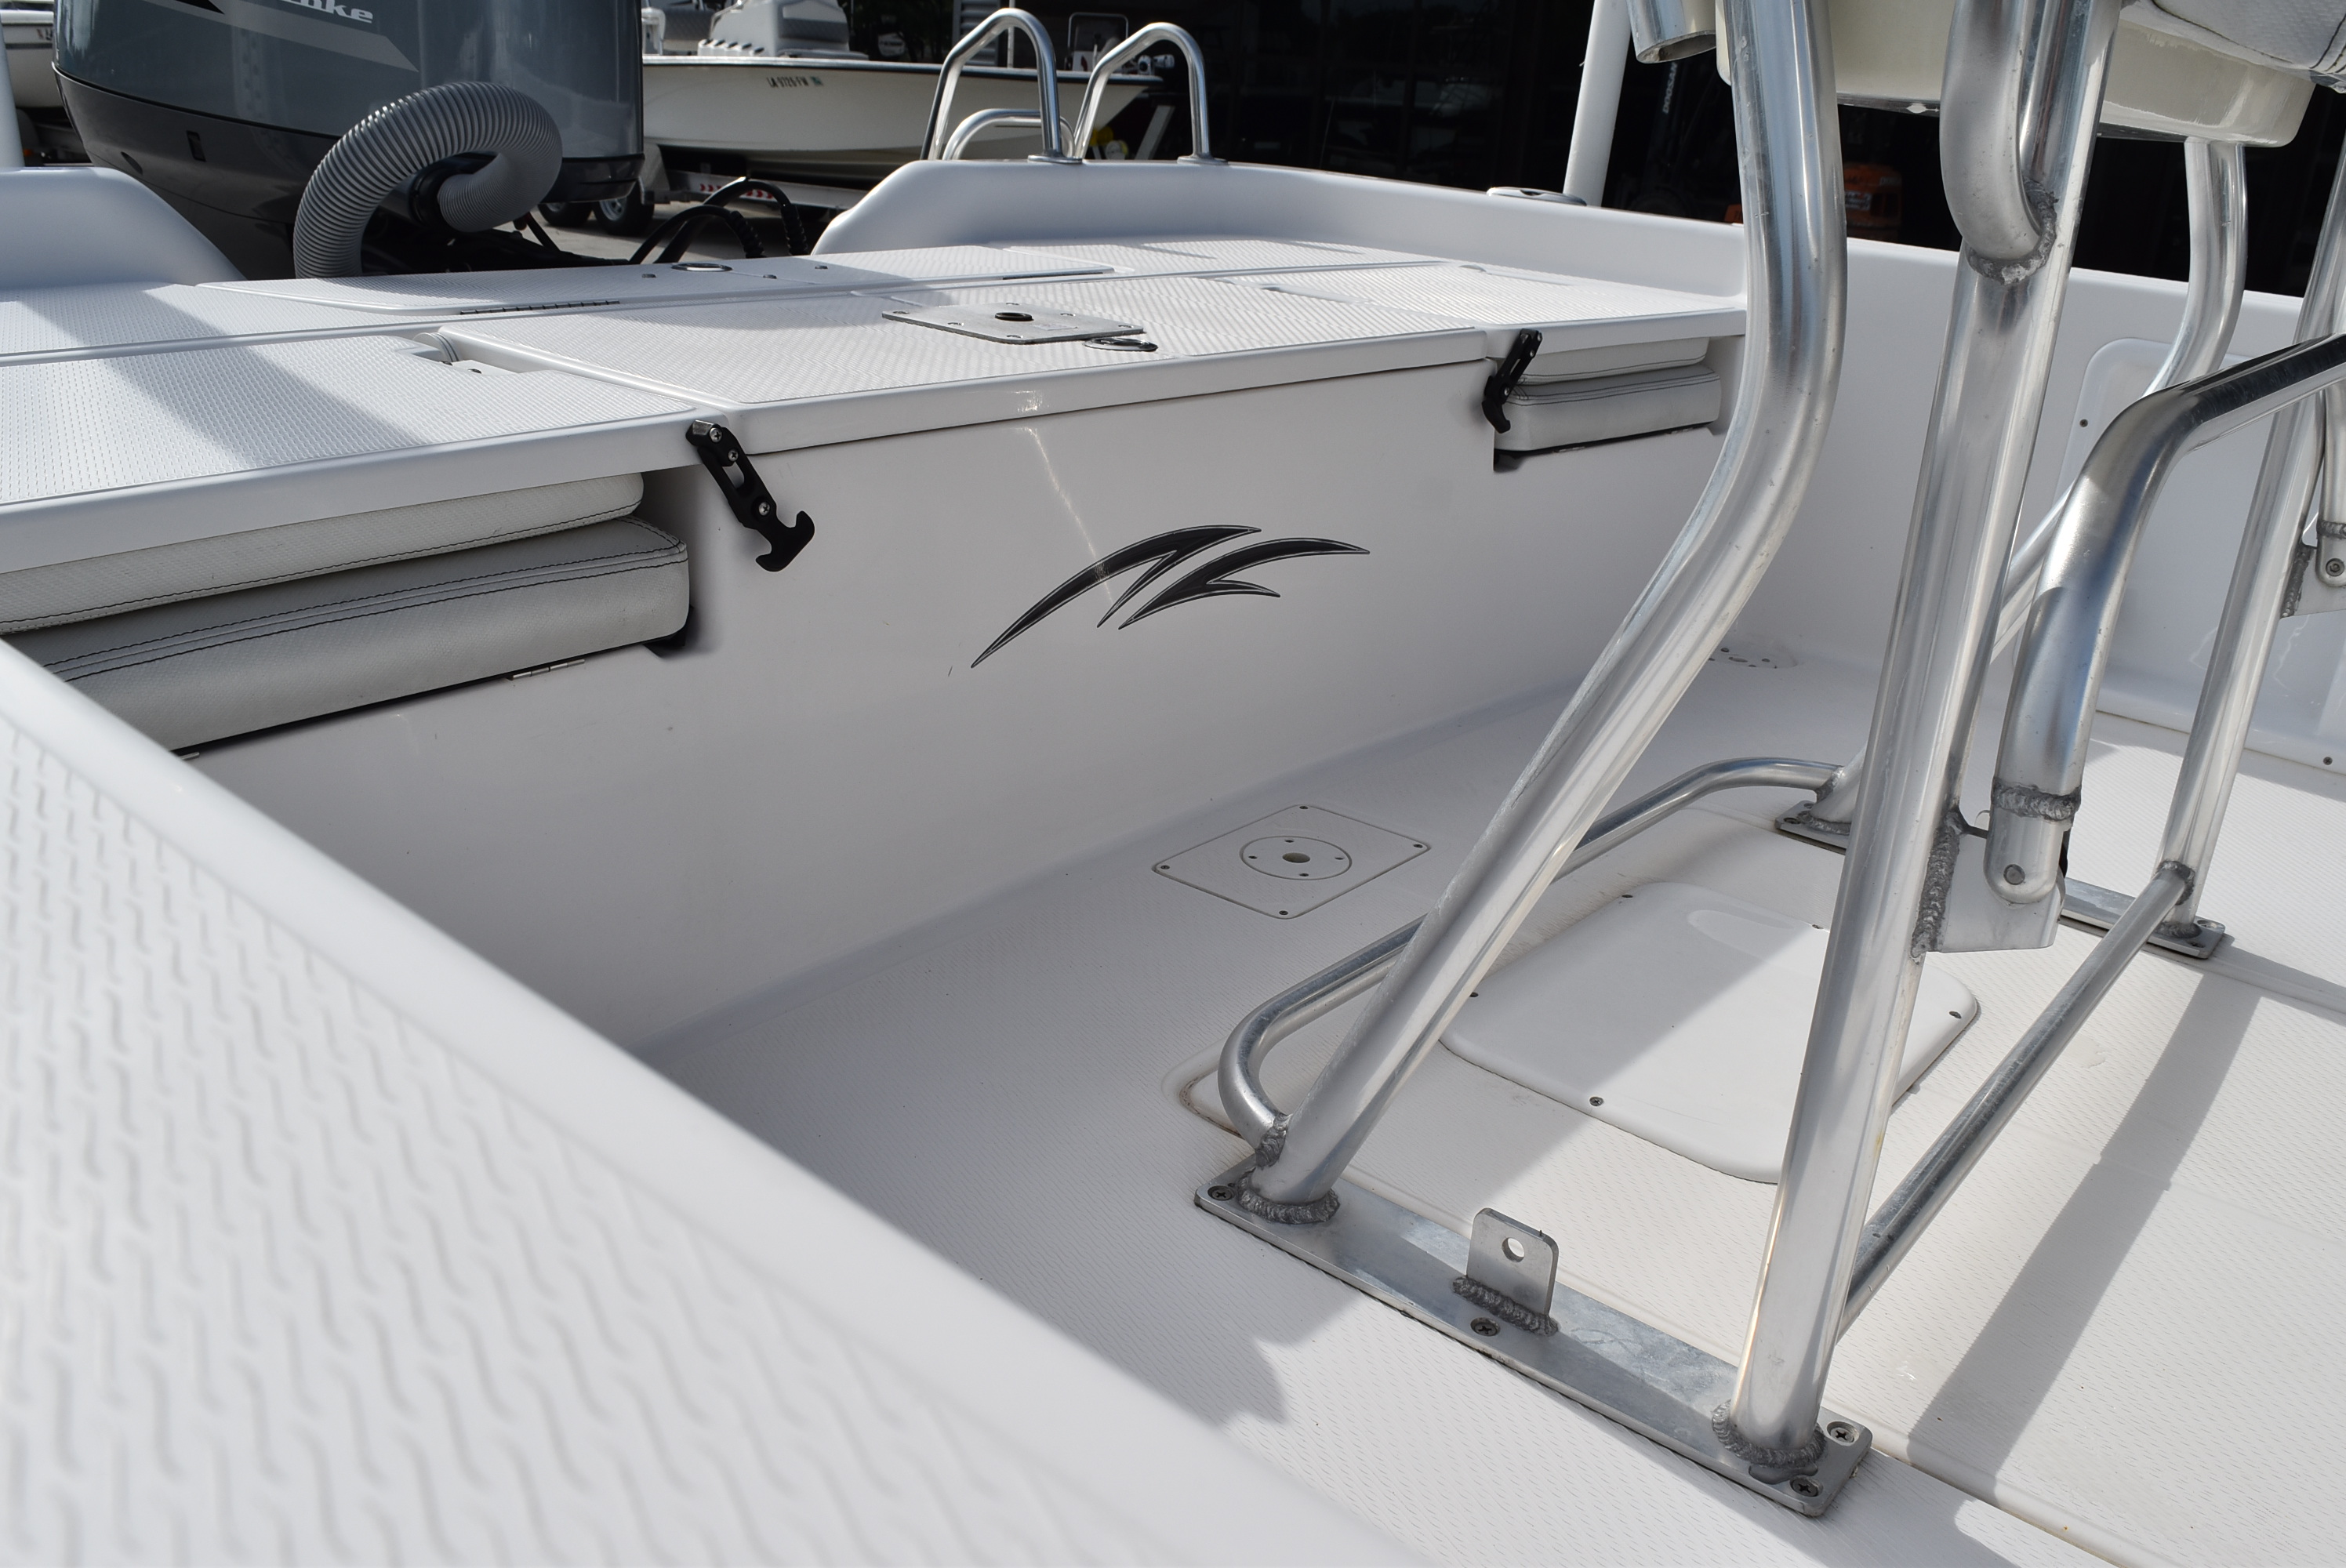 2015 Blue Wave boat for sale, model of the boat is 2200 & Image # 2 of 8